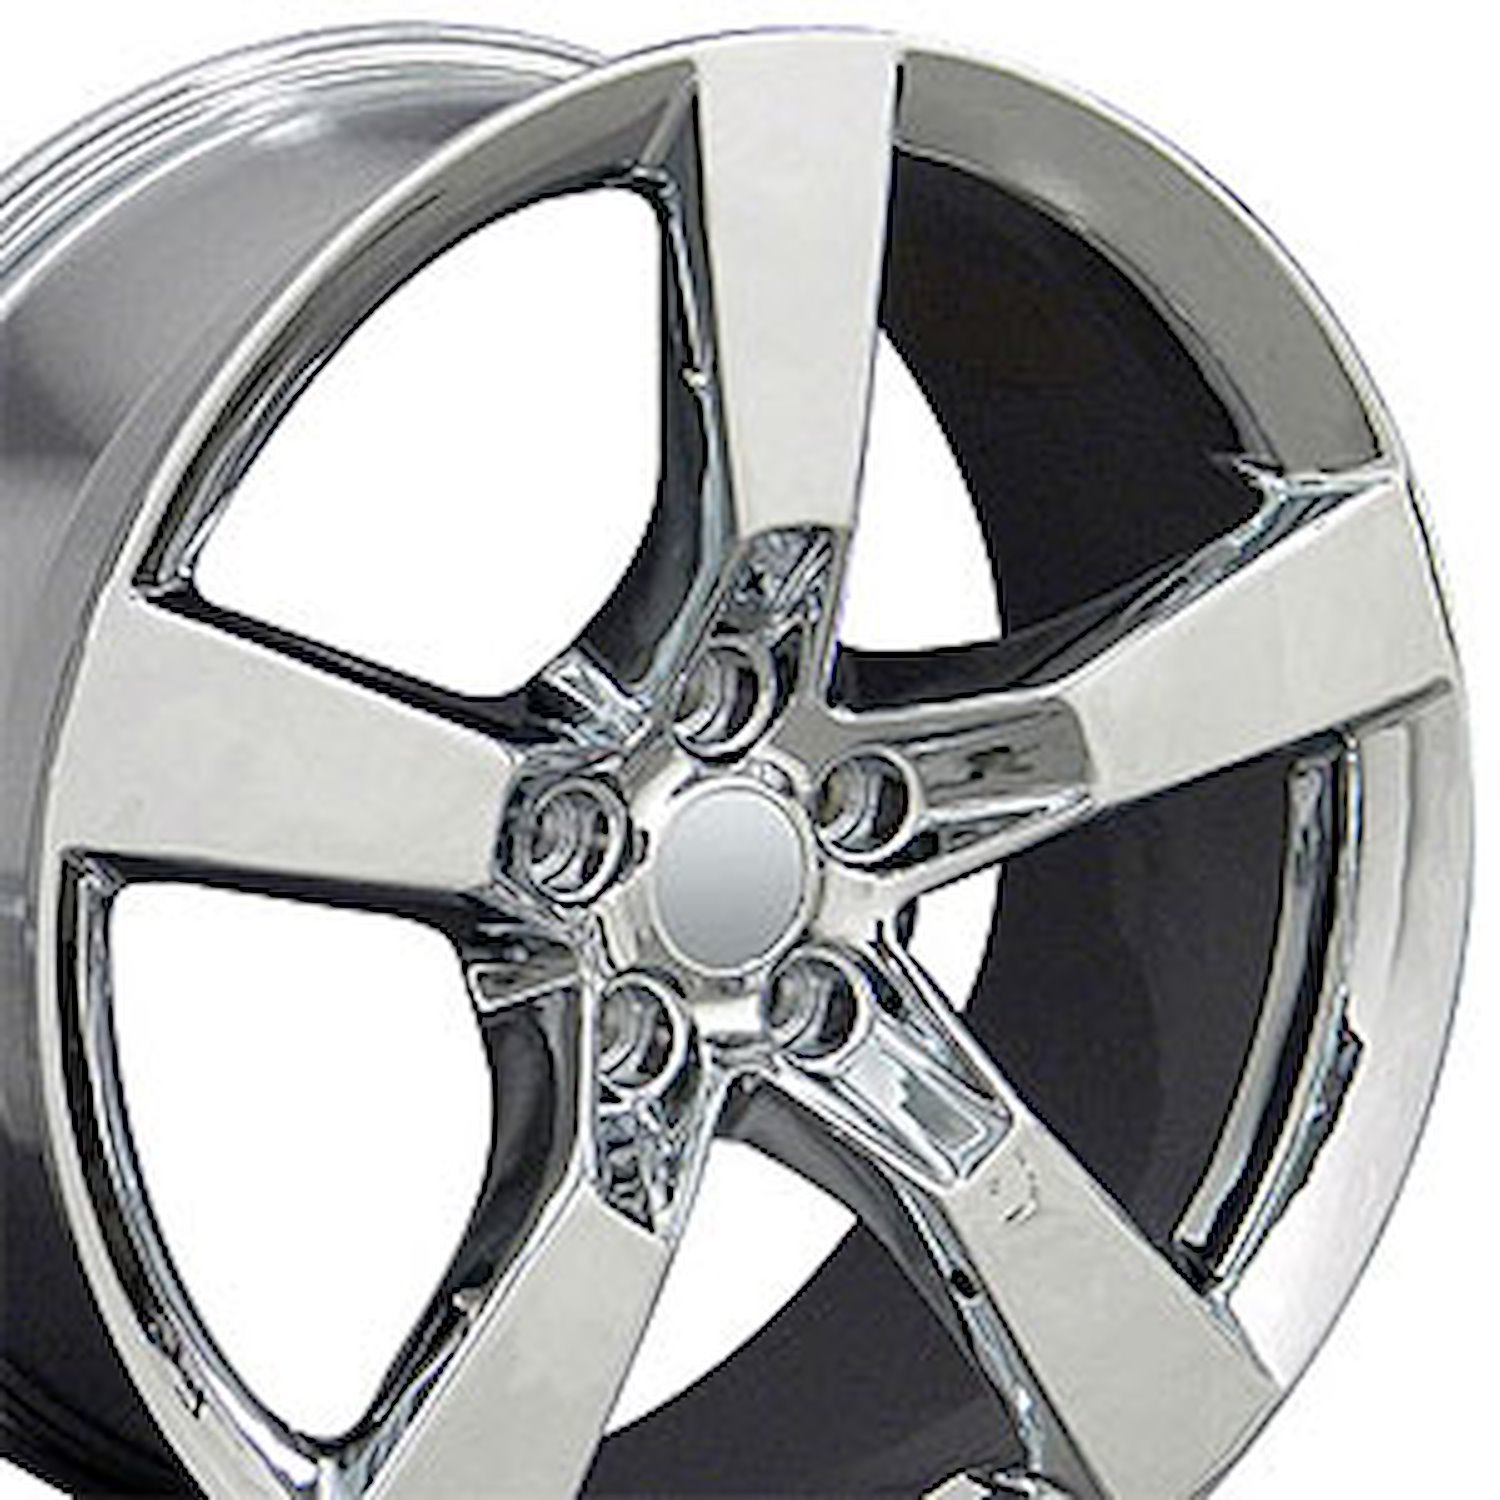 Camaro SS Style Wheel Size: 20" x 9" Bolt Pattern: 5 x 120 Rear Spacing: 6.38" Offset: +35mm